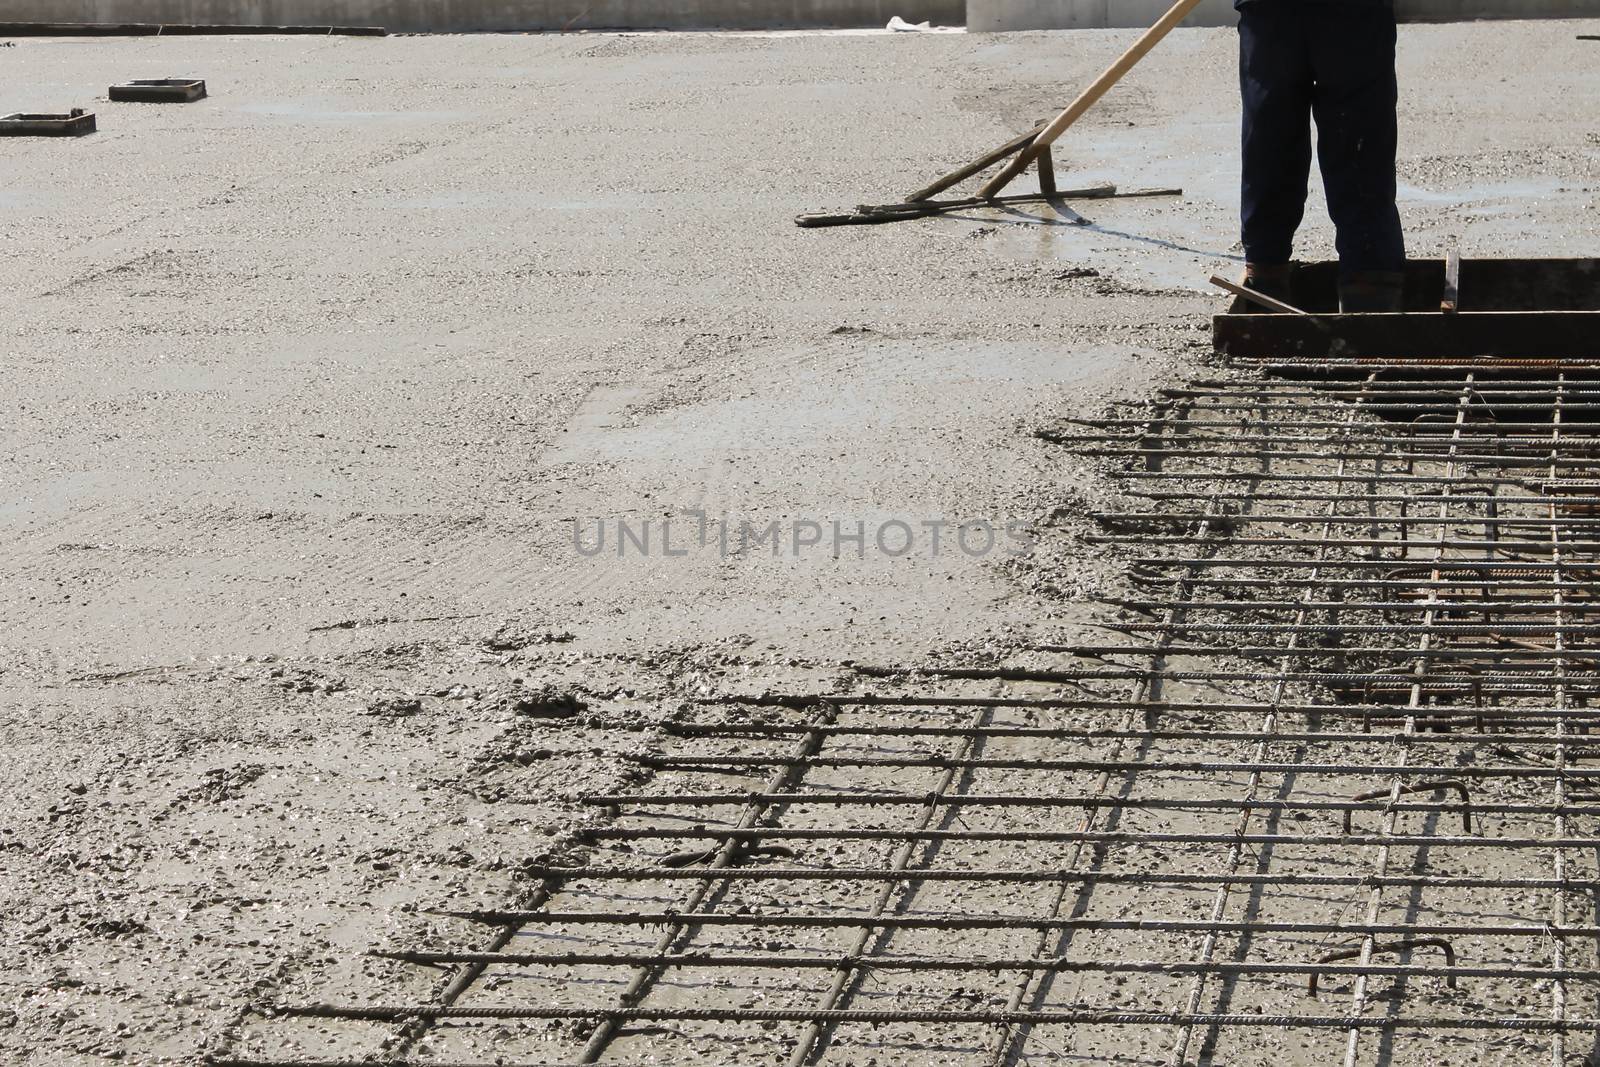 workers at the construction site poured concrete floor.